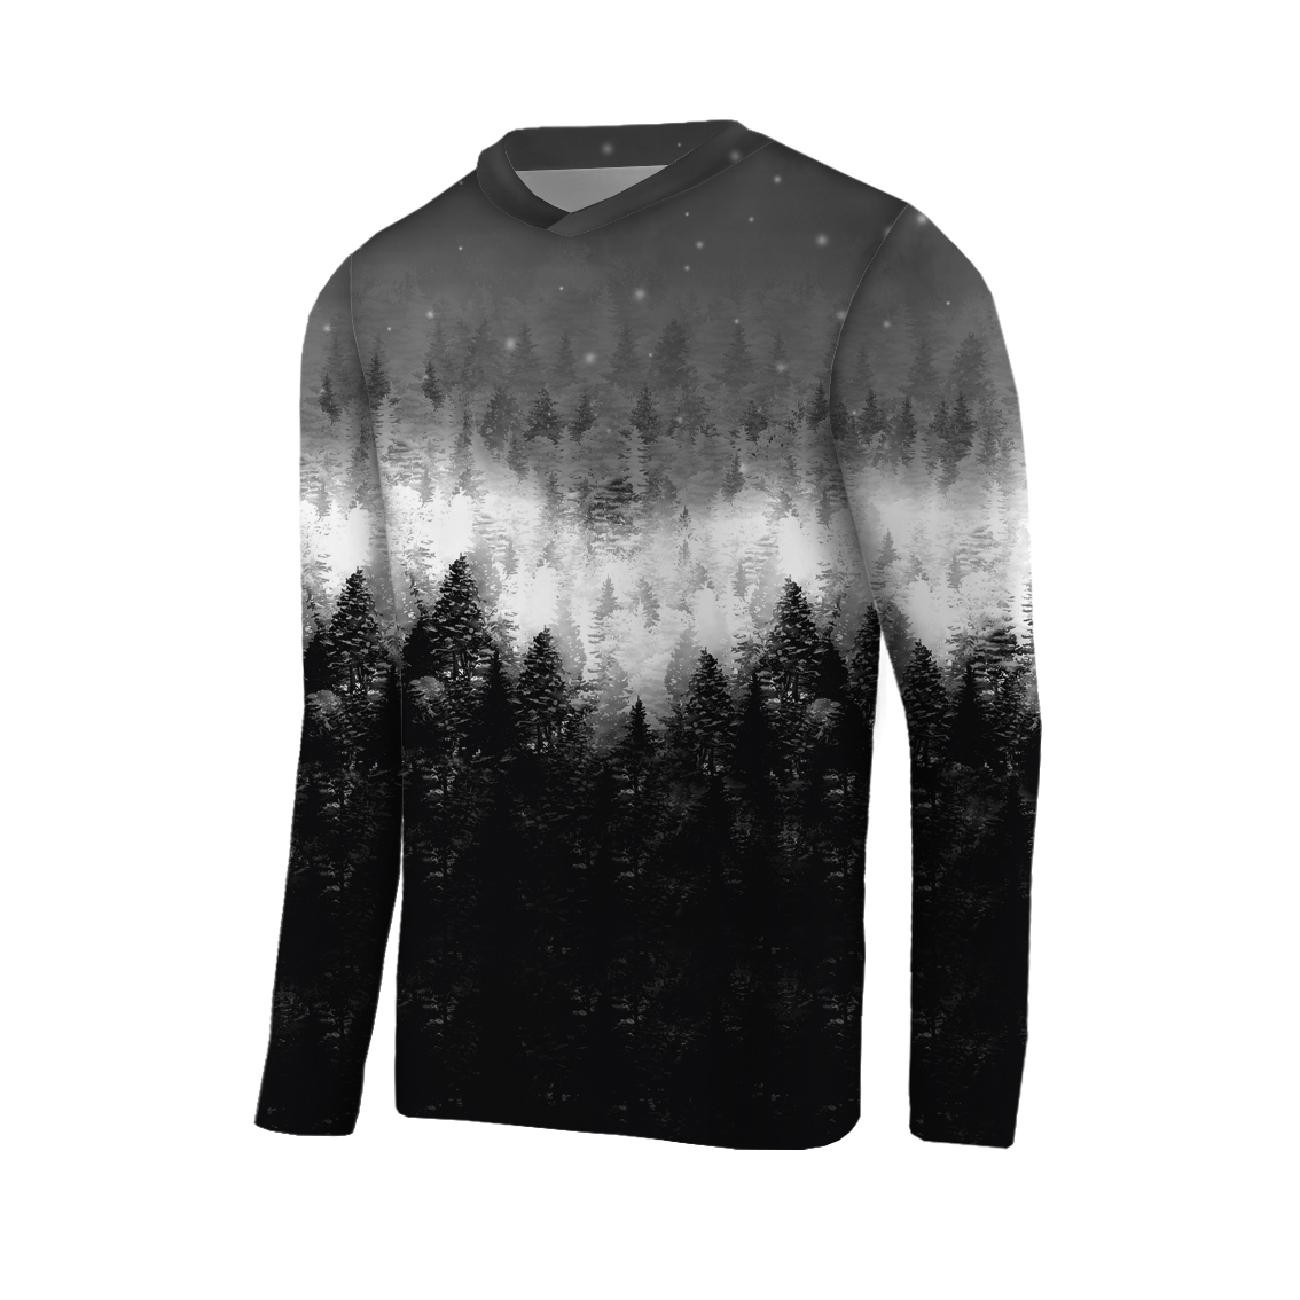 THERMO MEN'S BLOUSE (JIM) - FORREST OMBRE (WINTER IN THE MOUNTAIN) - sewing set